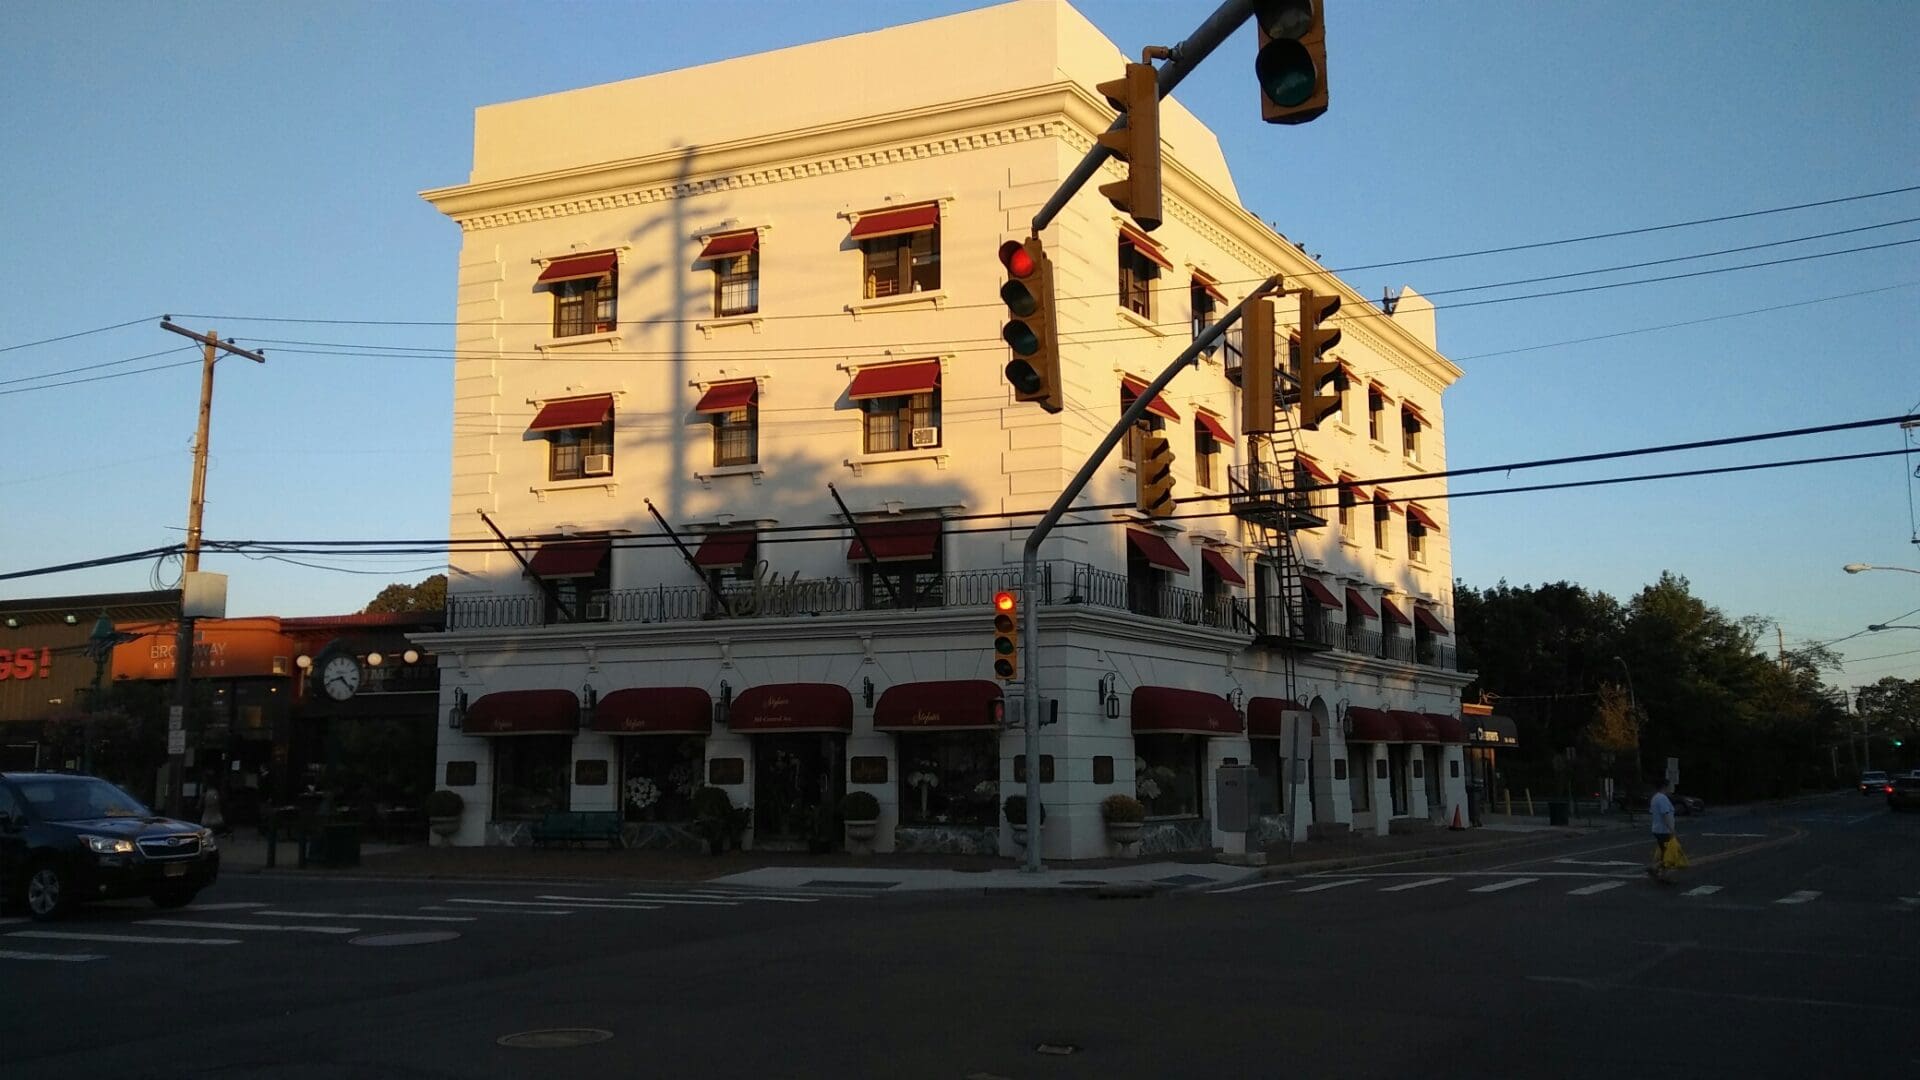 A three-story, white building with red awnings and ground-floor businesses, including the ADP USA Solutions Gallery, located at a sunlit street intersection with traffic lights and a pedestrian crossing.